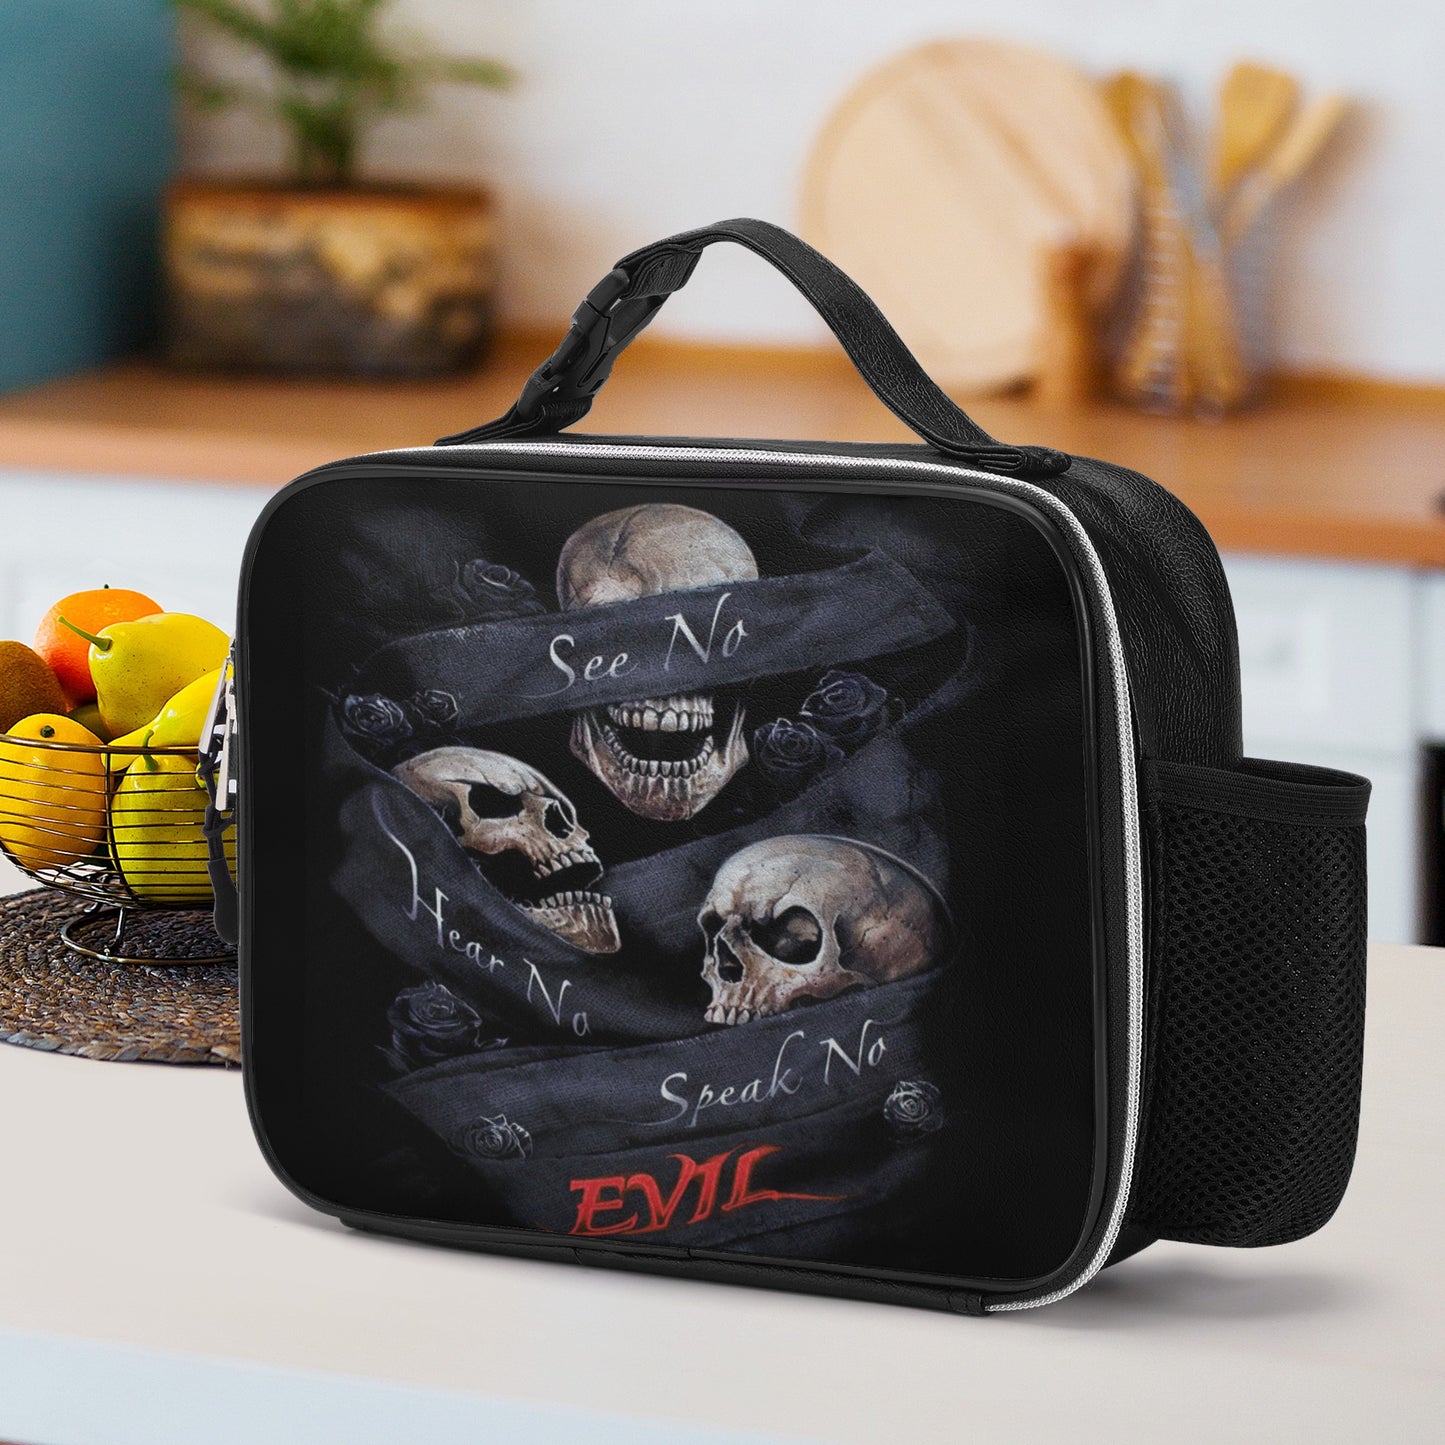 No see no hear no speak evils Detachable Leather Lunch Bag